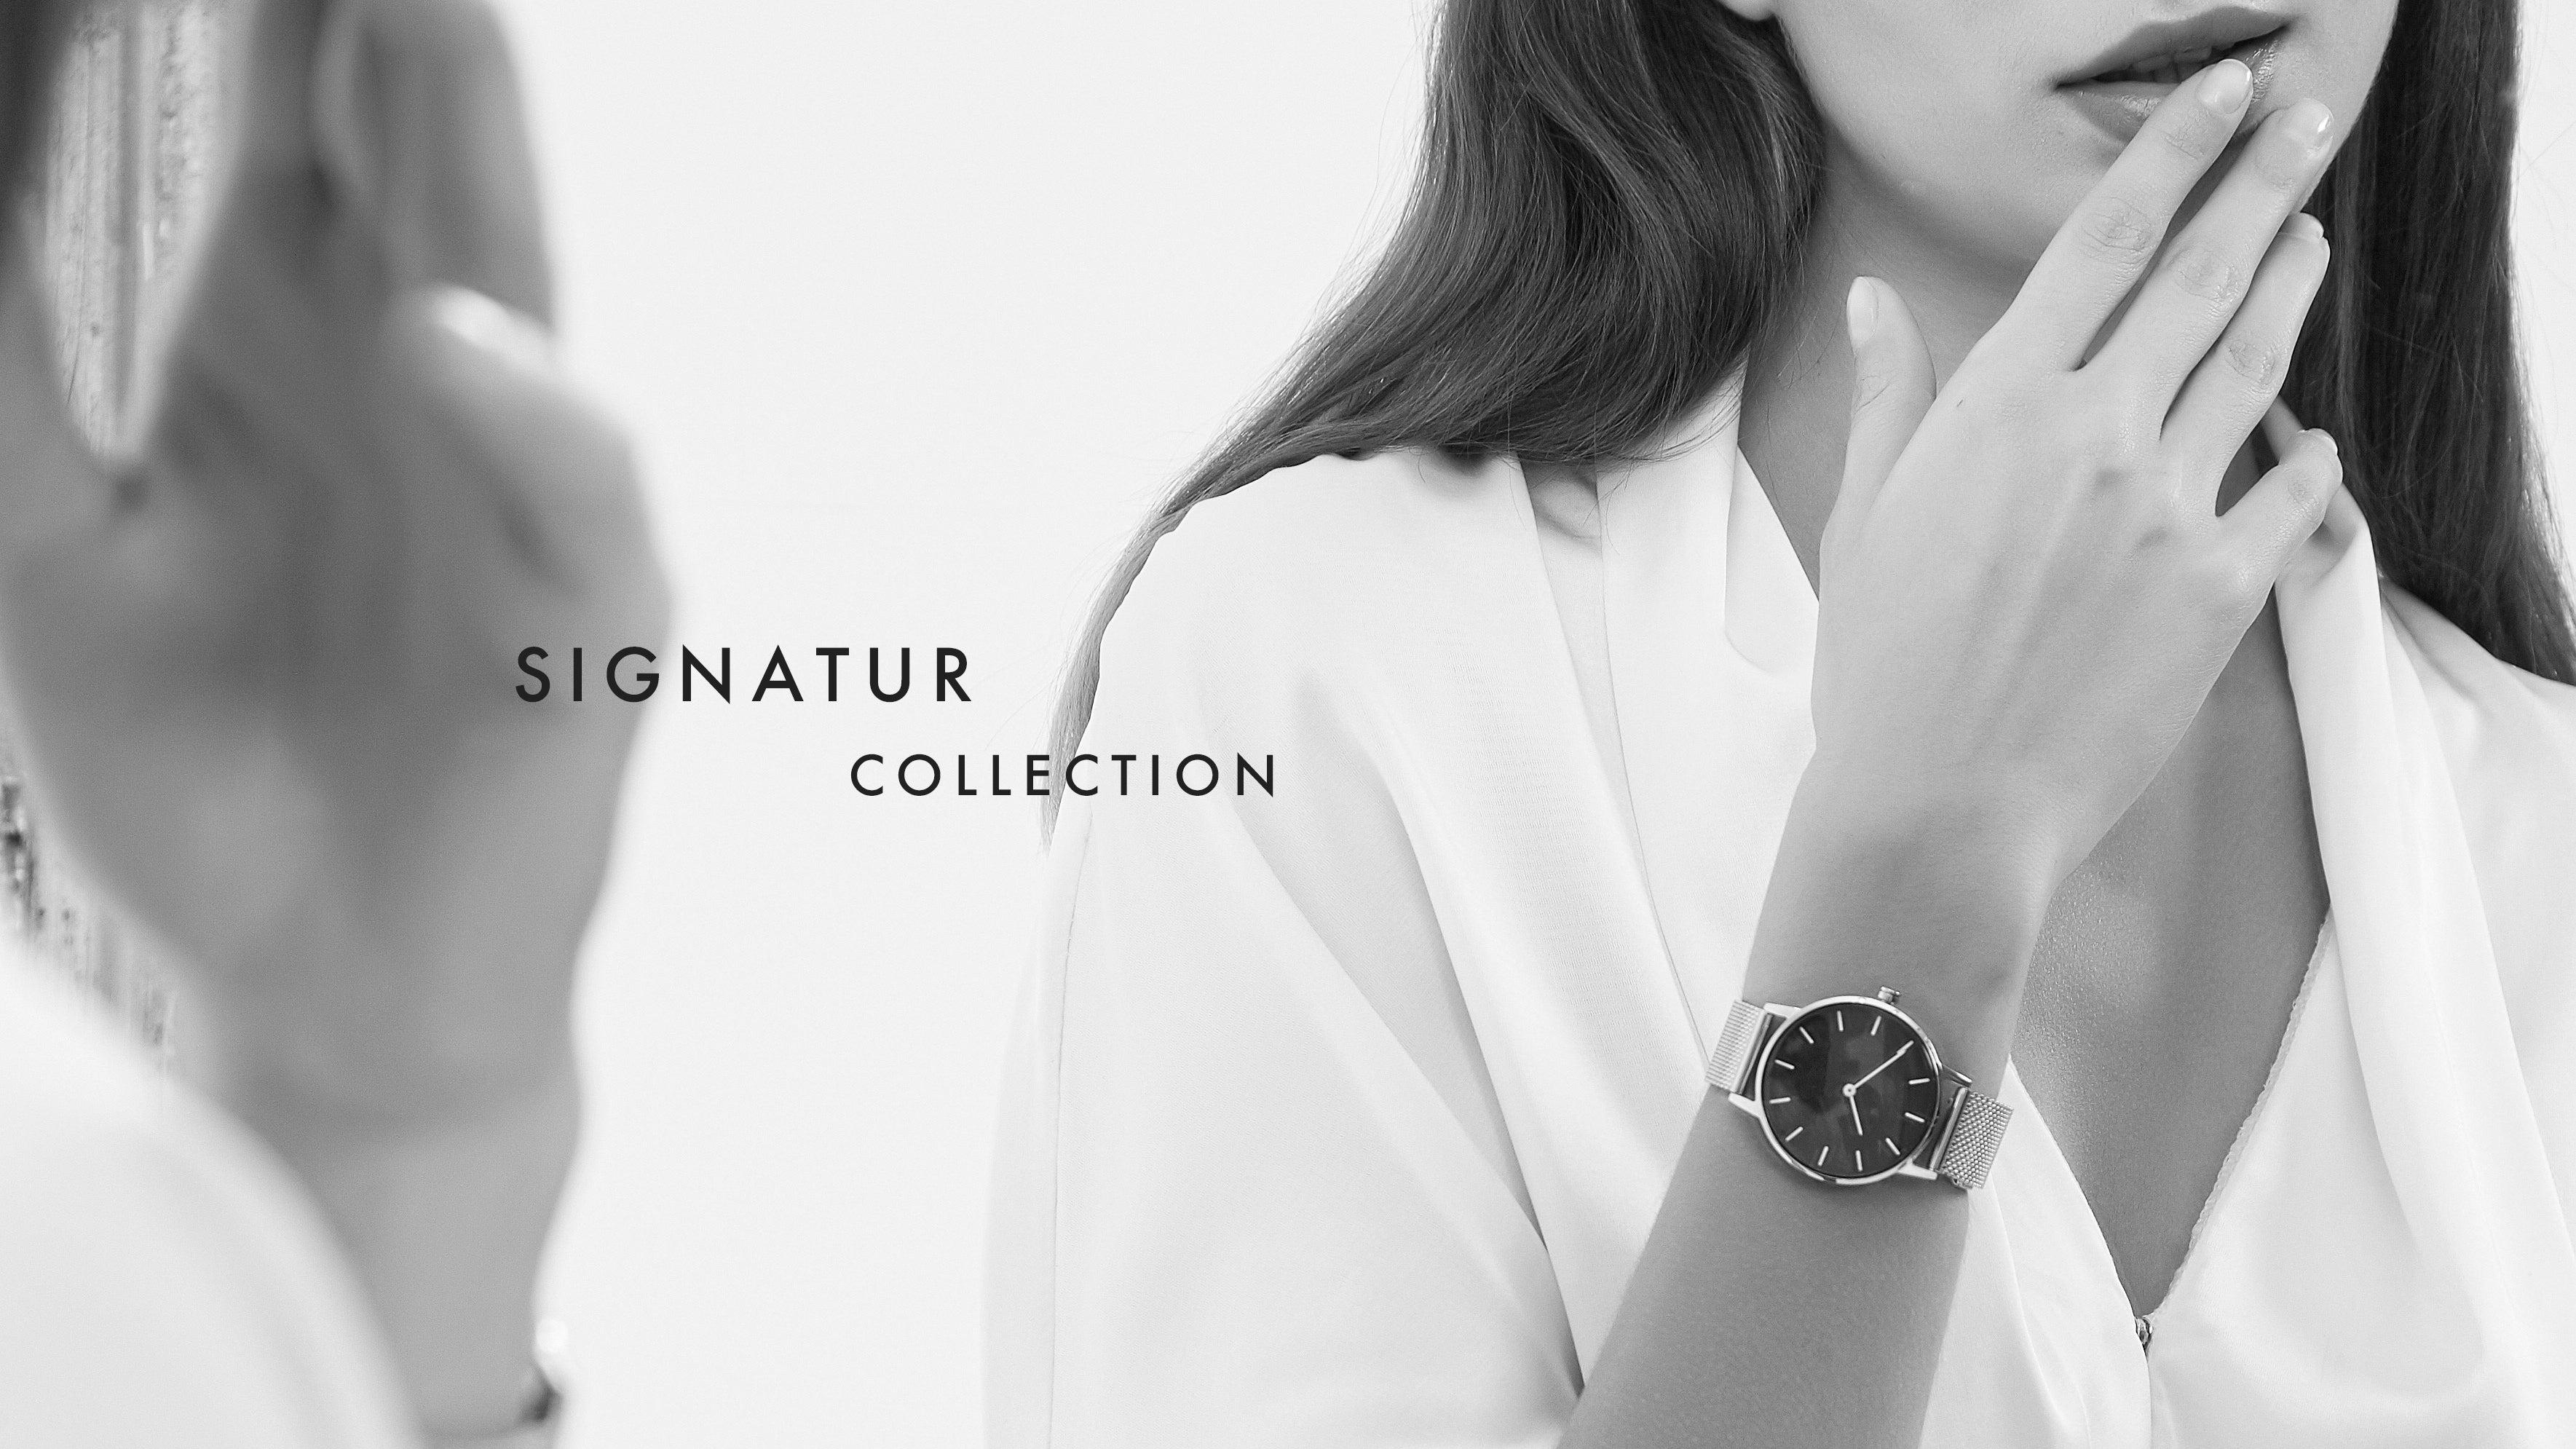 Collection Lookbook: Signatur Collection